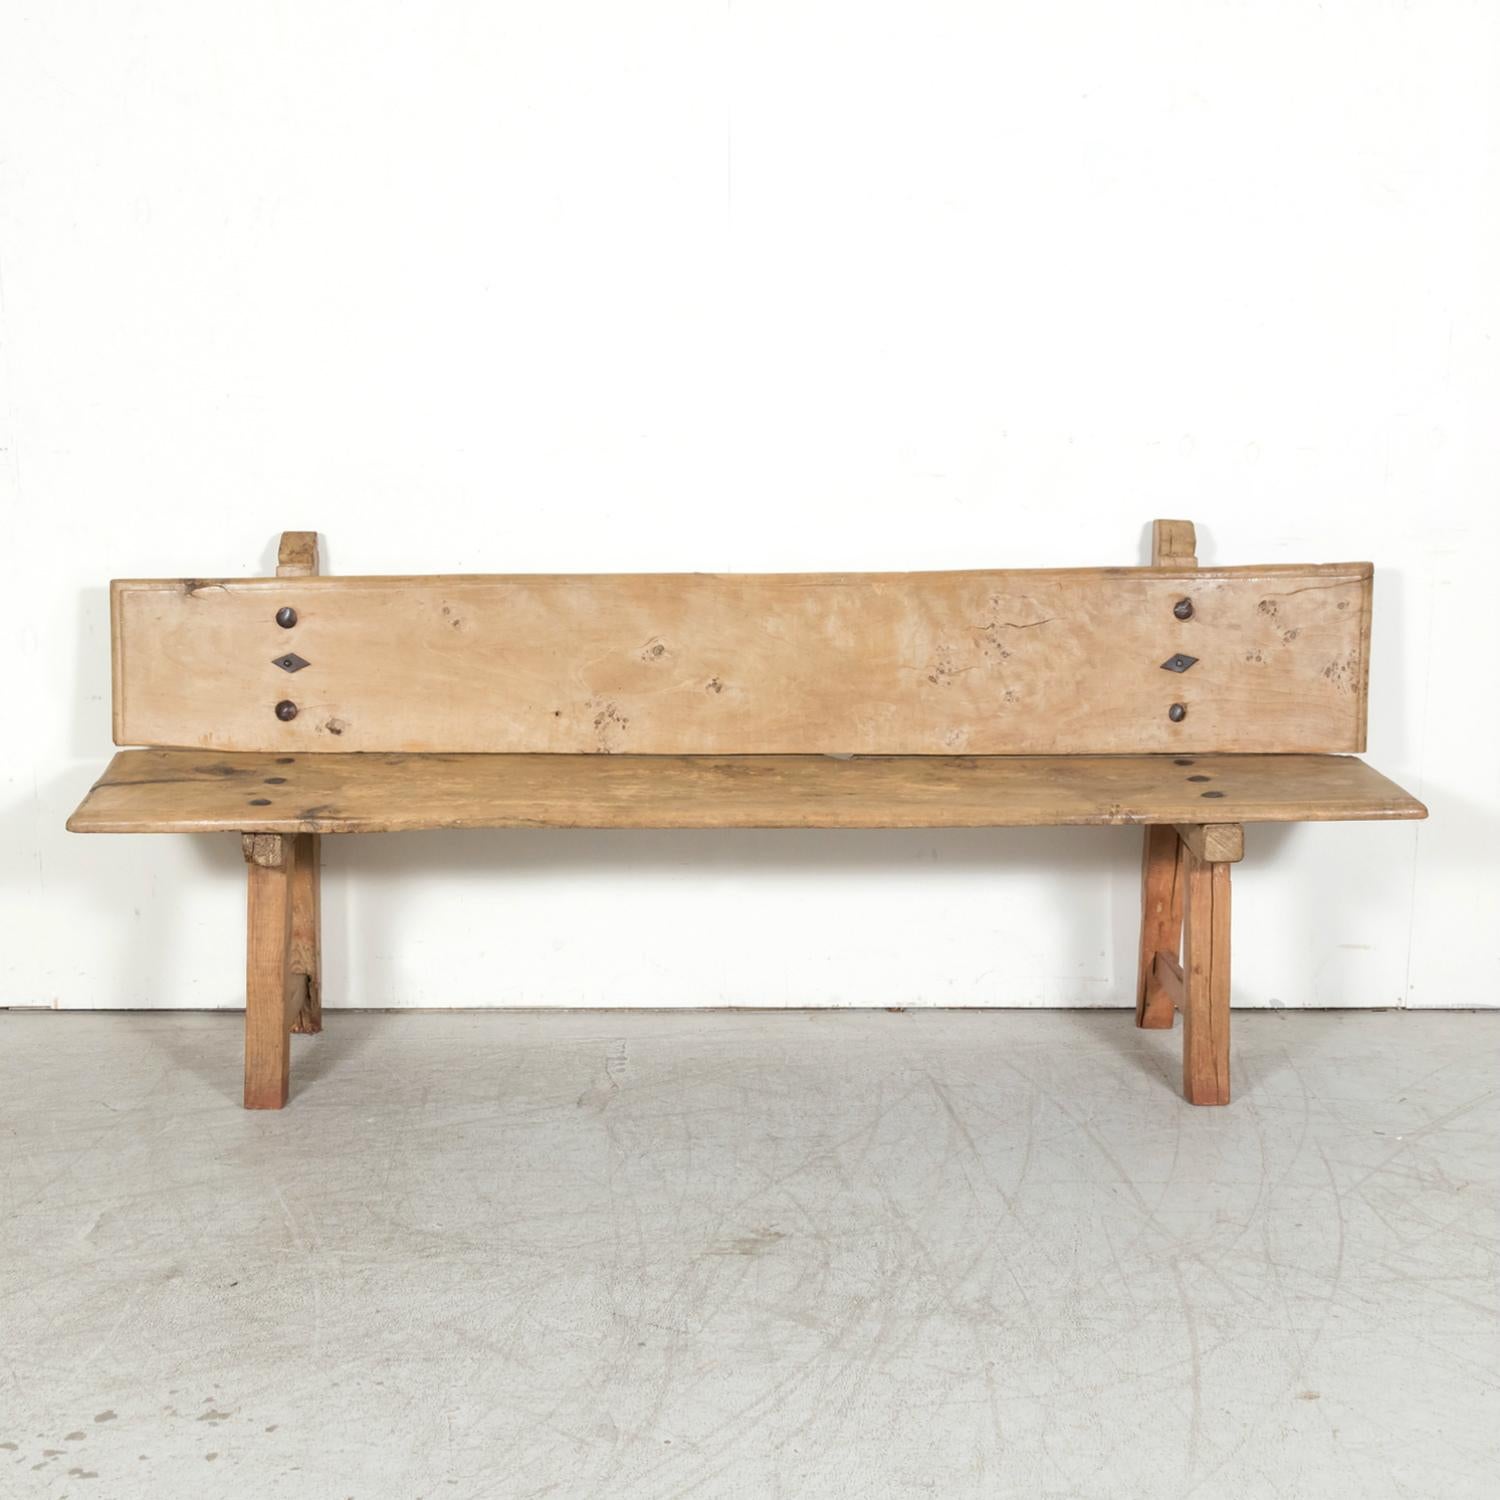 Hand-Carved Large 18th Century Primitive Spanish Catalan Pine Bench